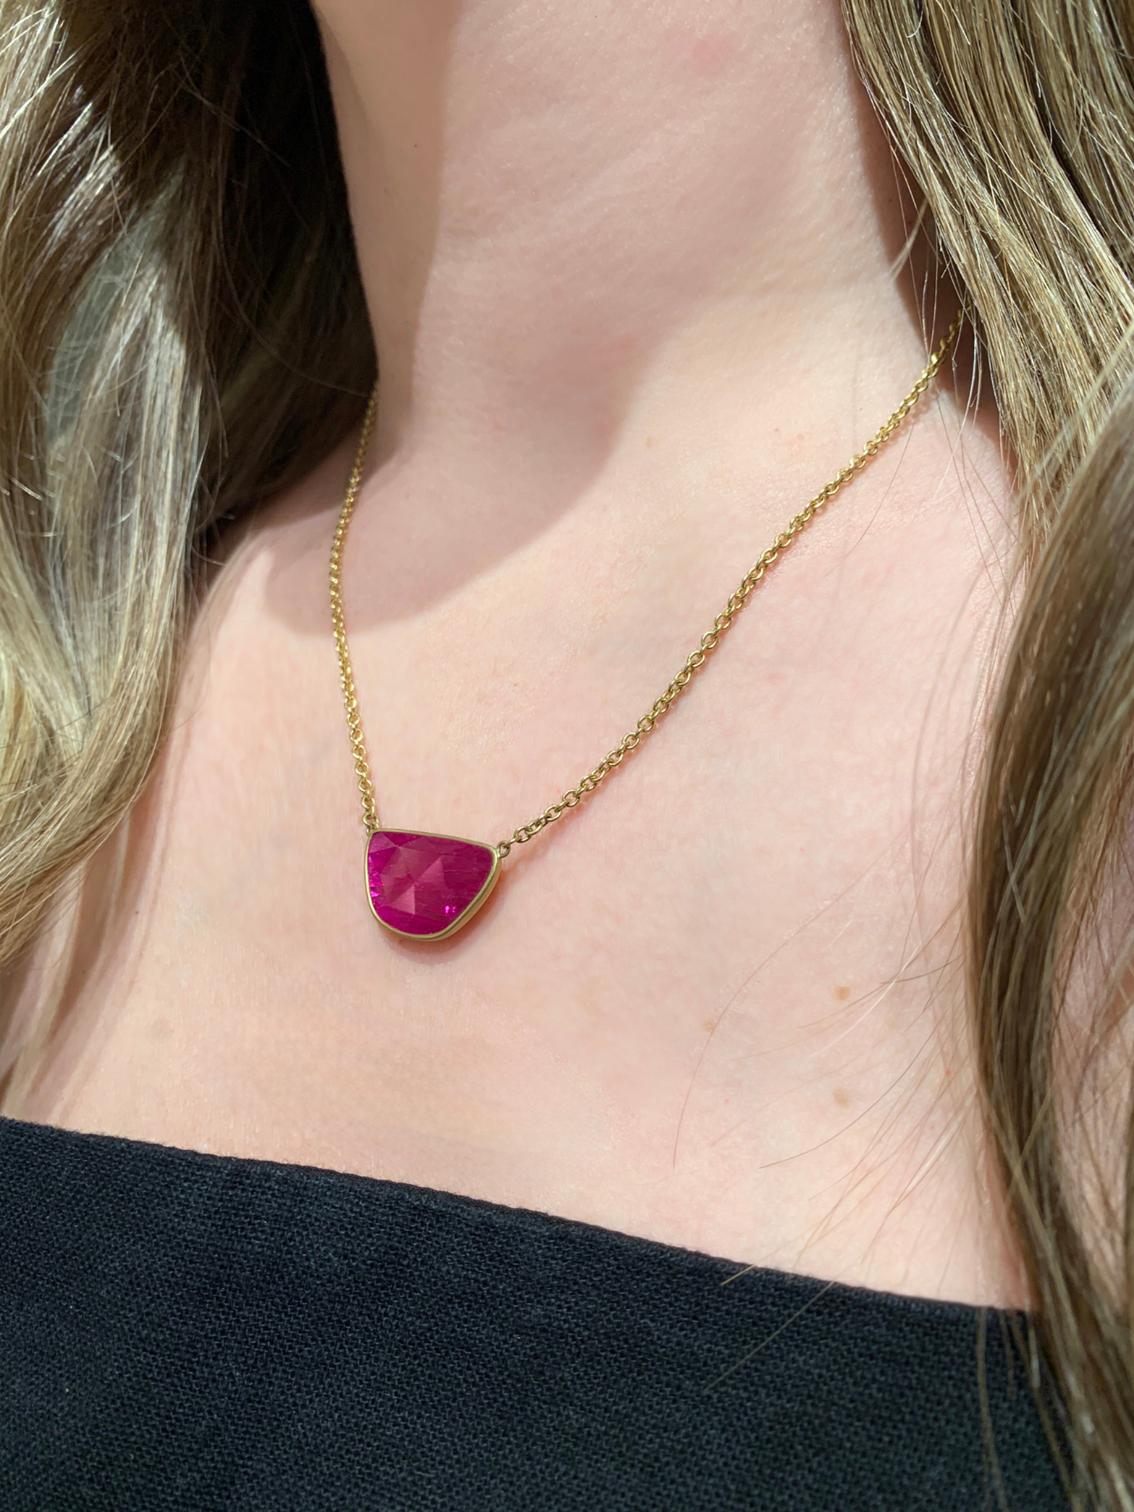 Artist 6.87 carat Faceted Hot Pink Ruby Yellow Gold Drop Necklace, Lola Brooks 2023 For Sale